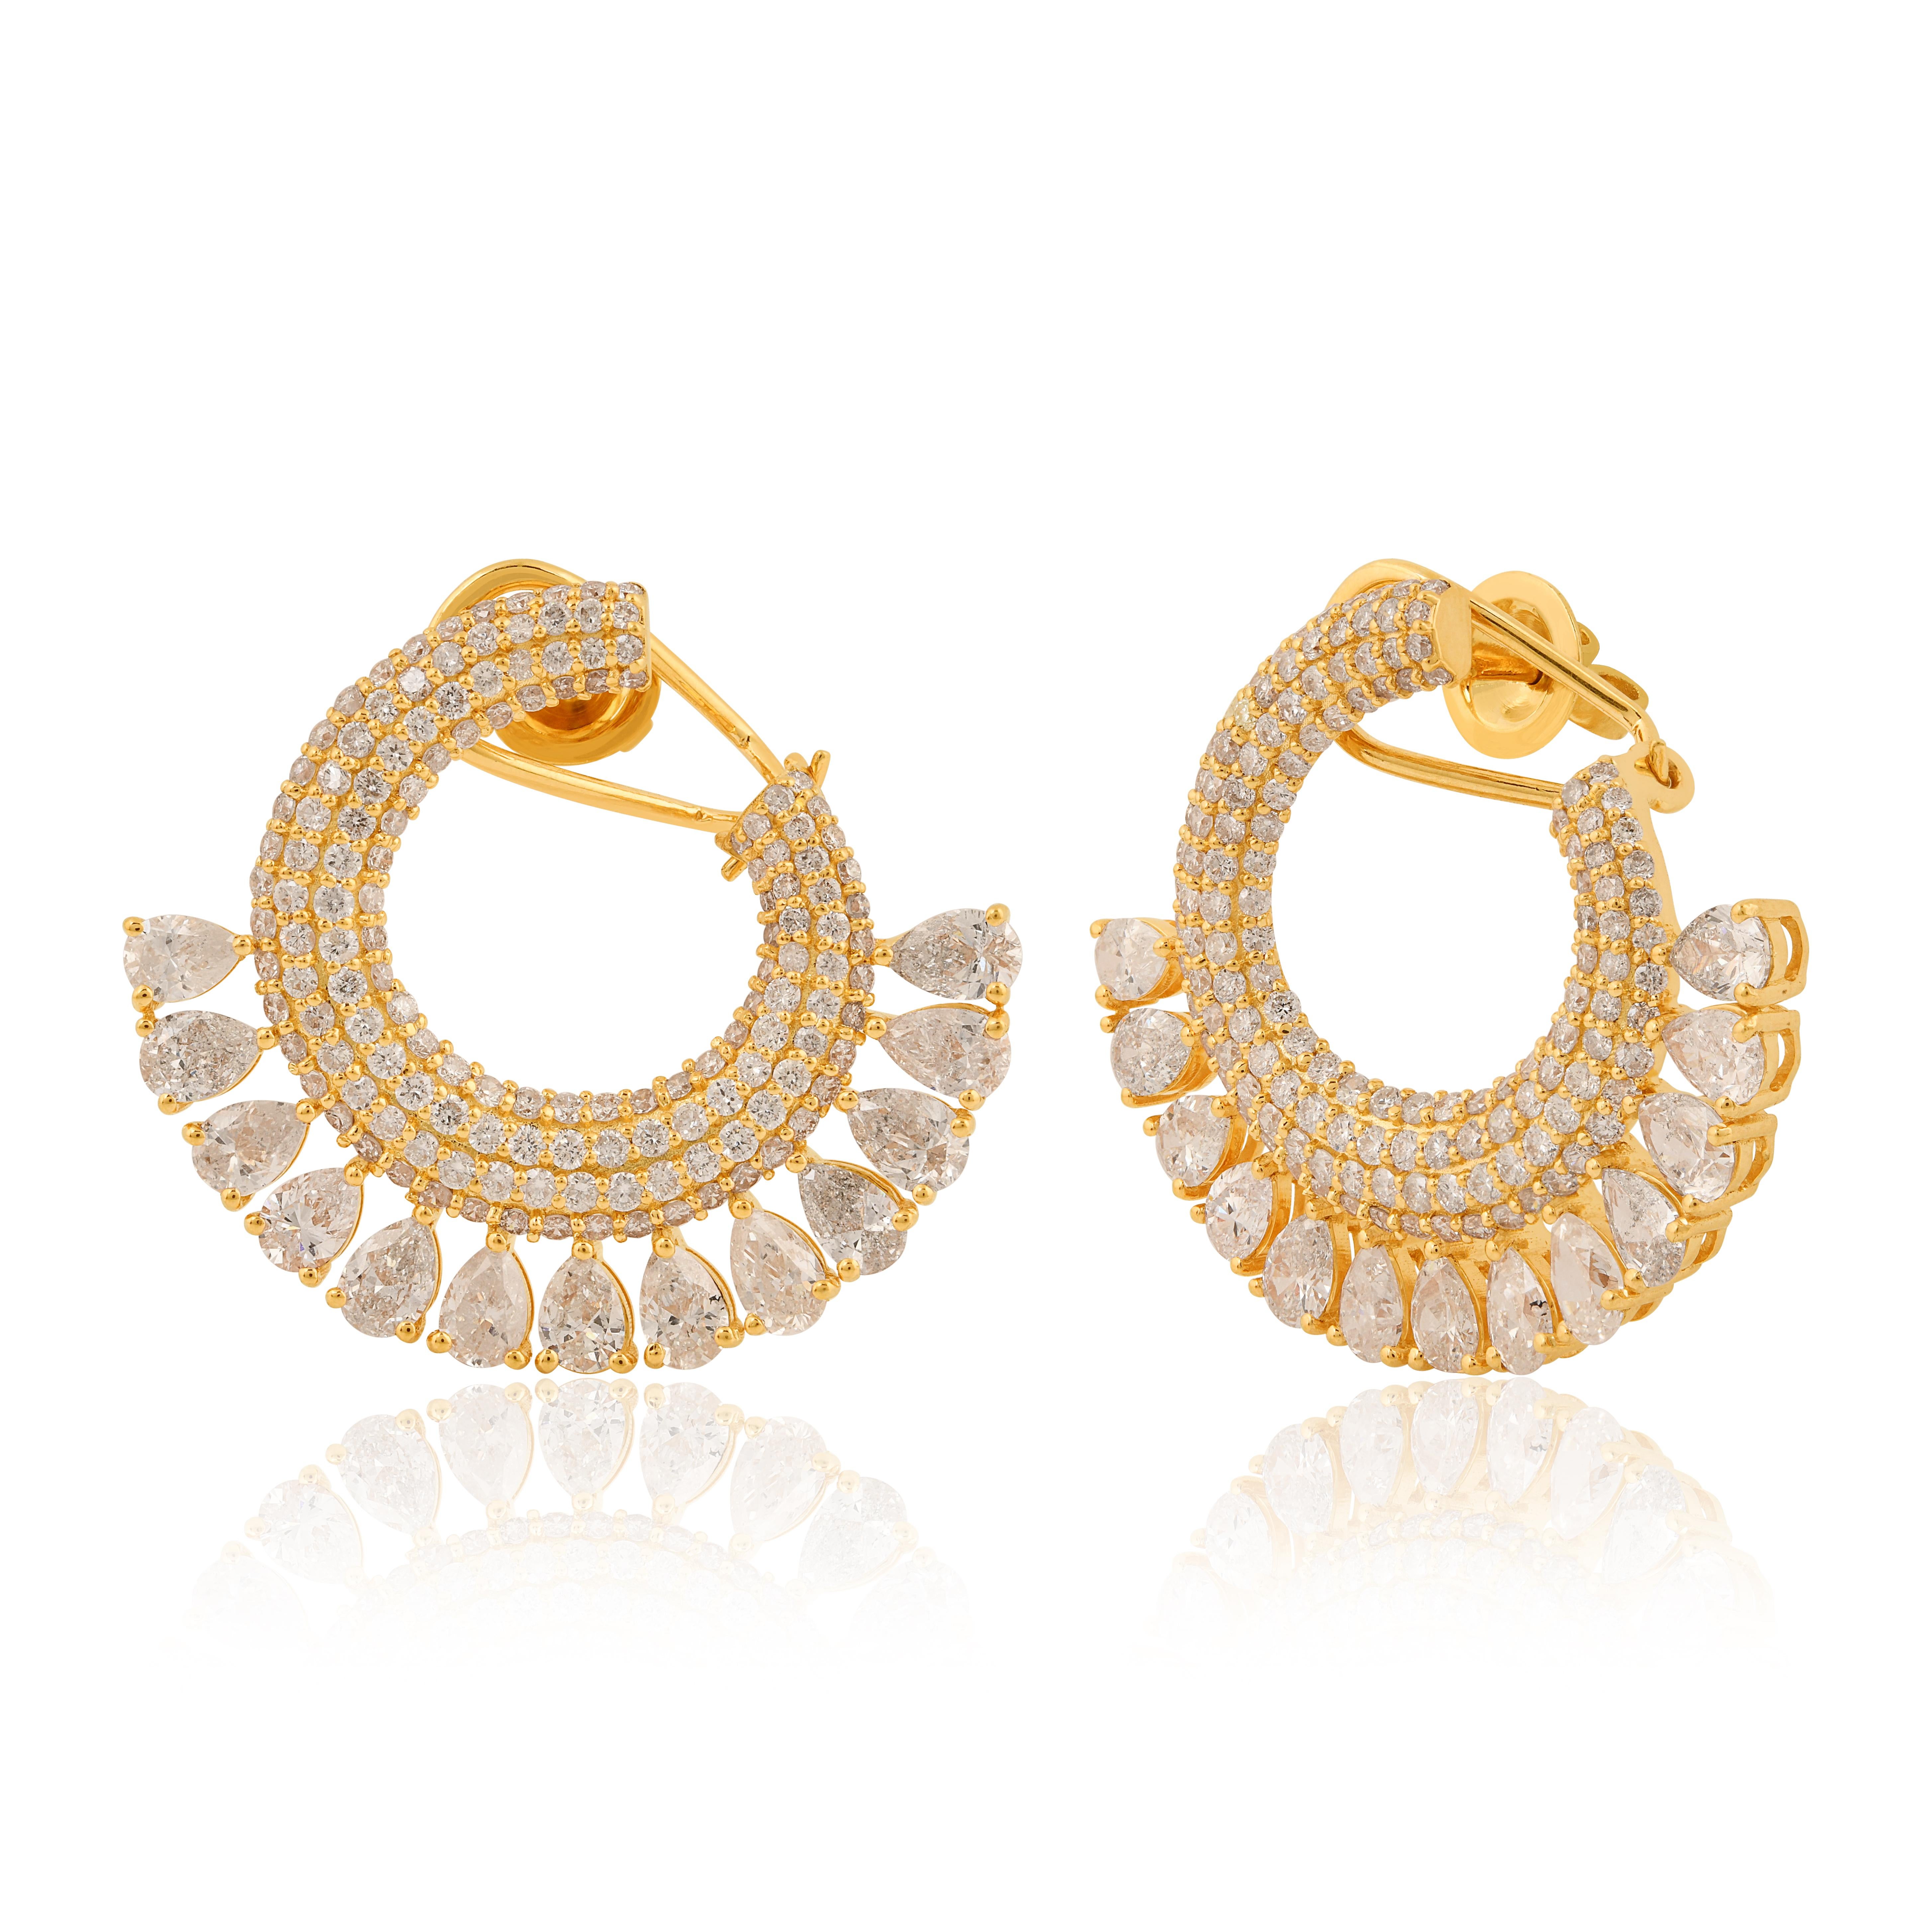 Item Code :- SEE-11766
Gross Weight :- 12.26 gm
14k Solid Yellow Gold Weight :- 10.66 gm
Natural Diamond Weight :- 8 carat  ( AVERAGE DIAMOND CLARITY SI1-SI2 & COLOR H-I )
Earrings Size :- 34x30 mm approx.

✦ Sizing
.....................
We can